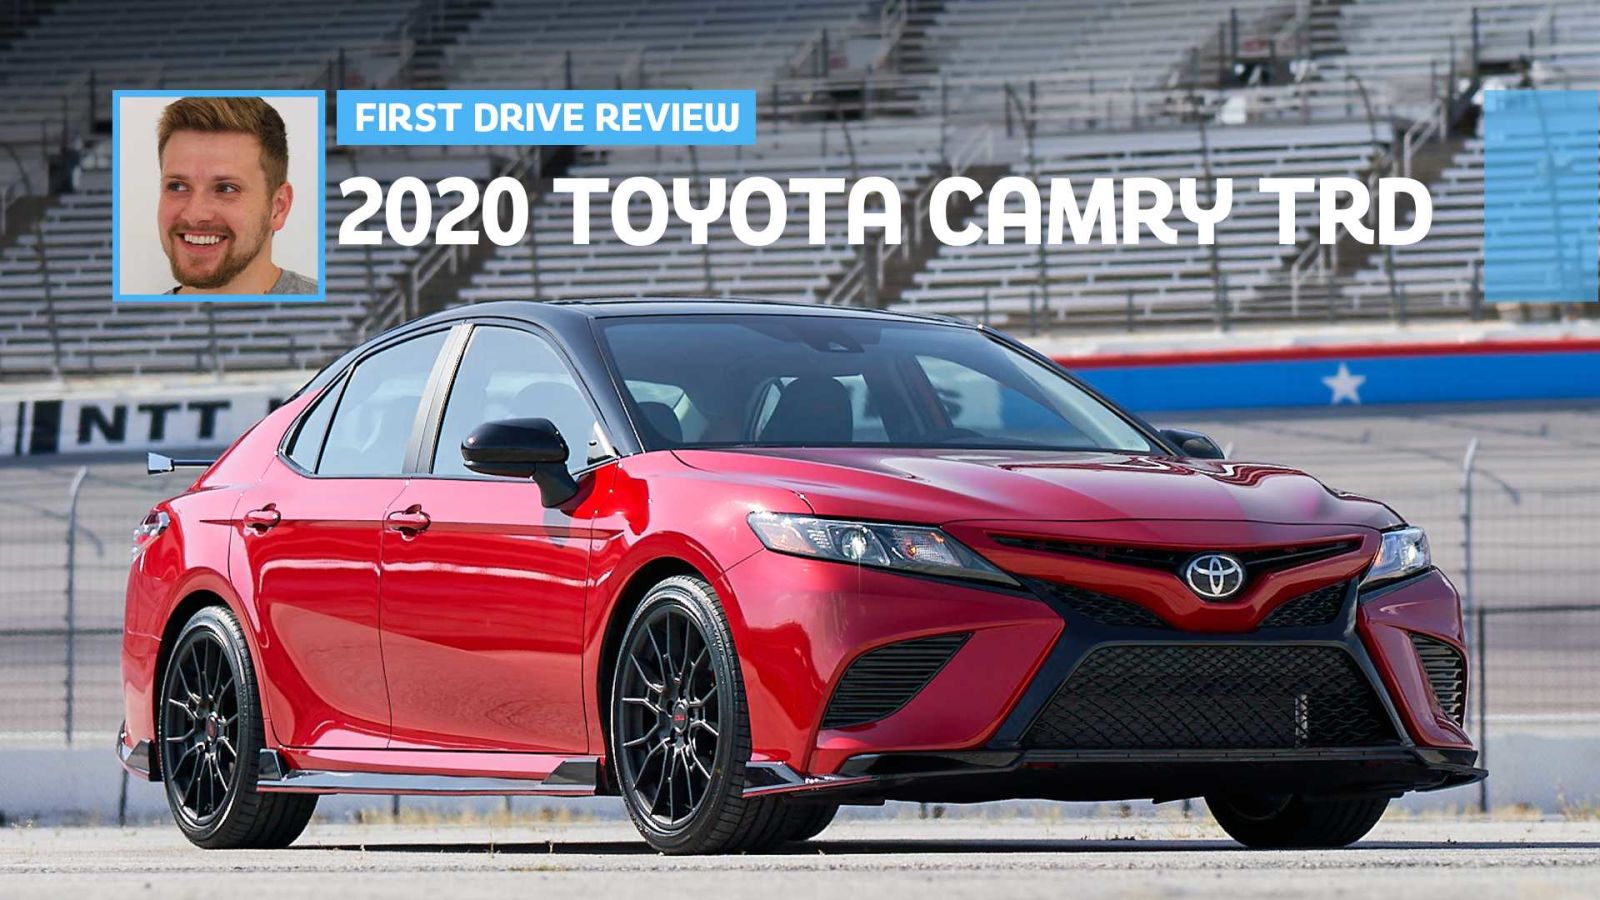 Illustration for article titled Apparently the Camry TRD is pretty legit